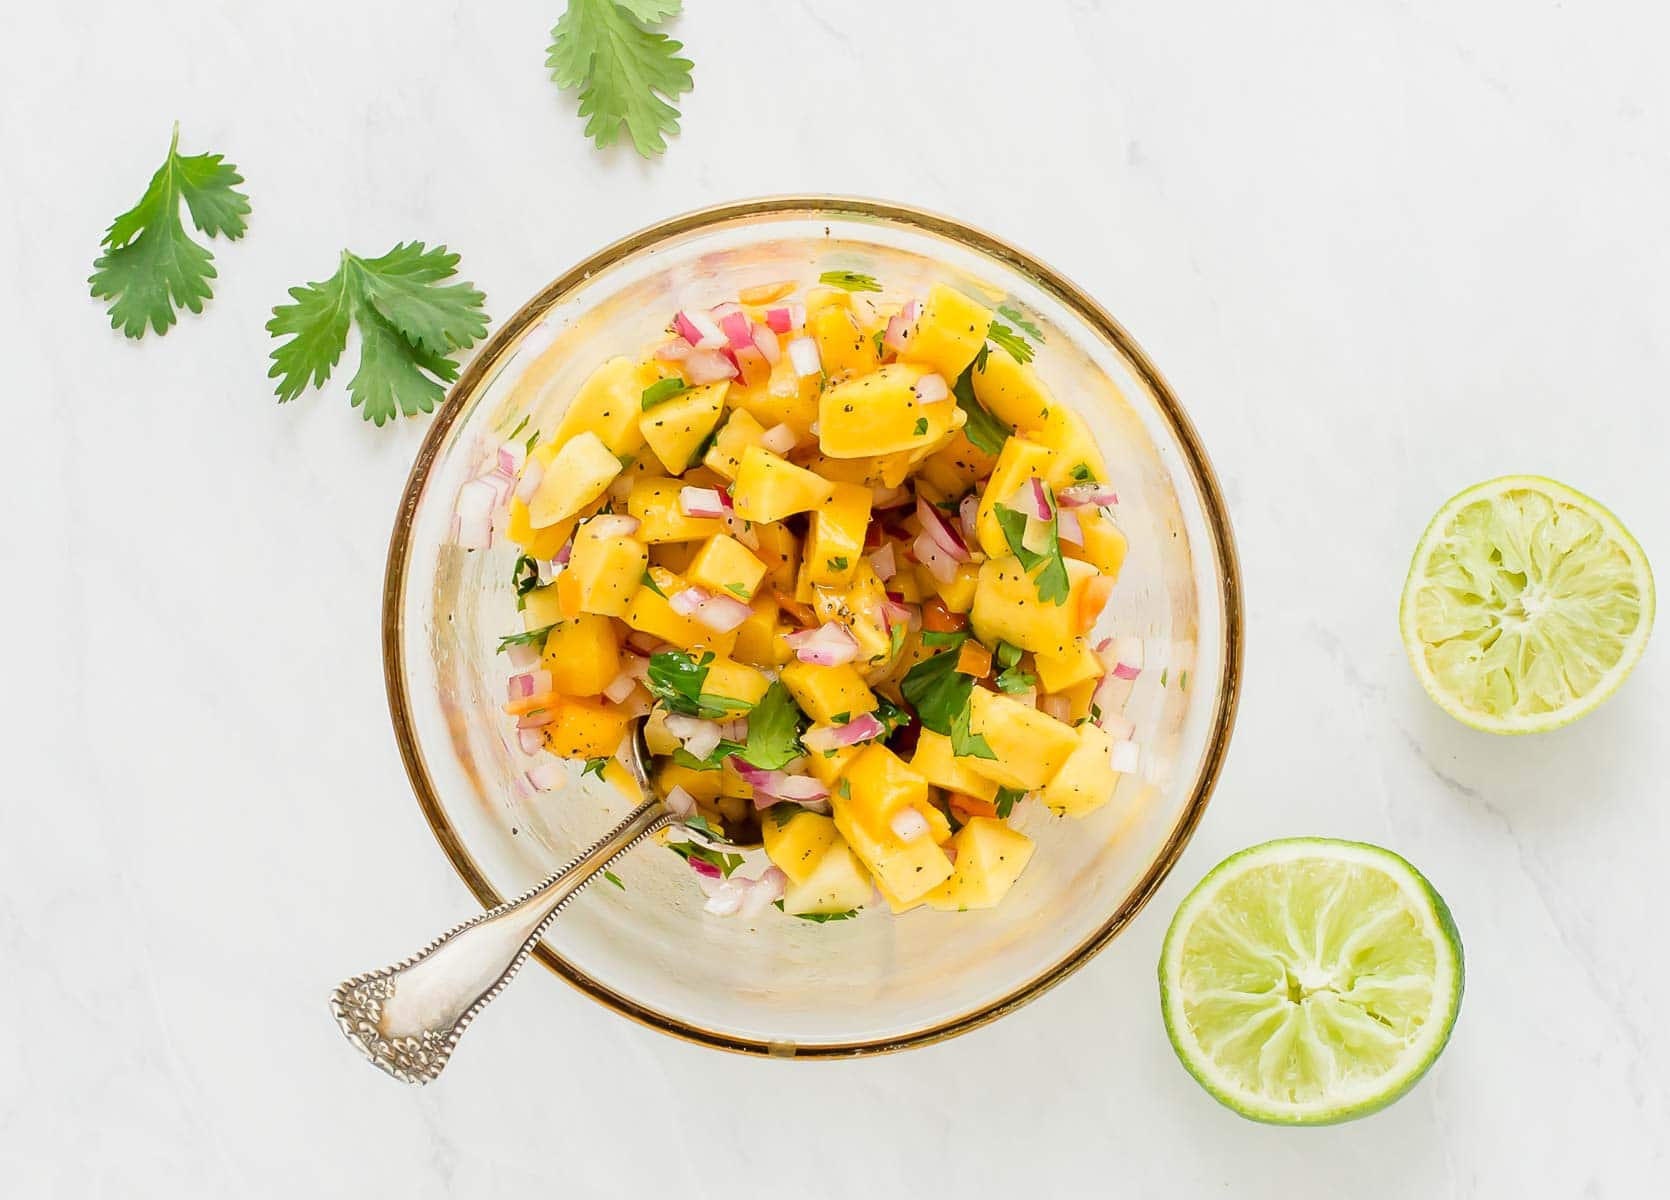 Bright yellow mango habanero salsa in a clear glass bowl with spoon.